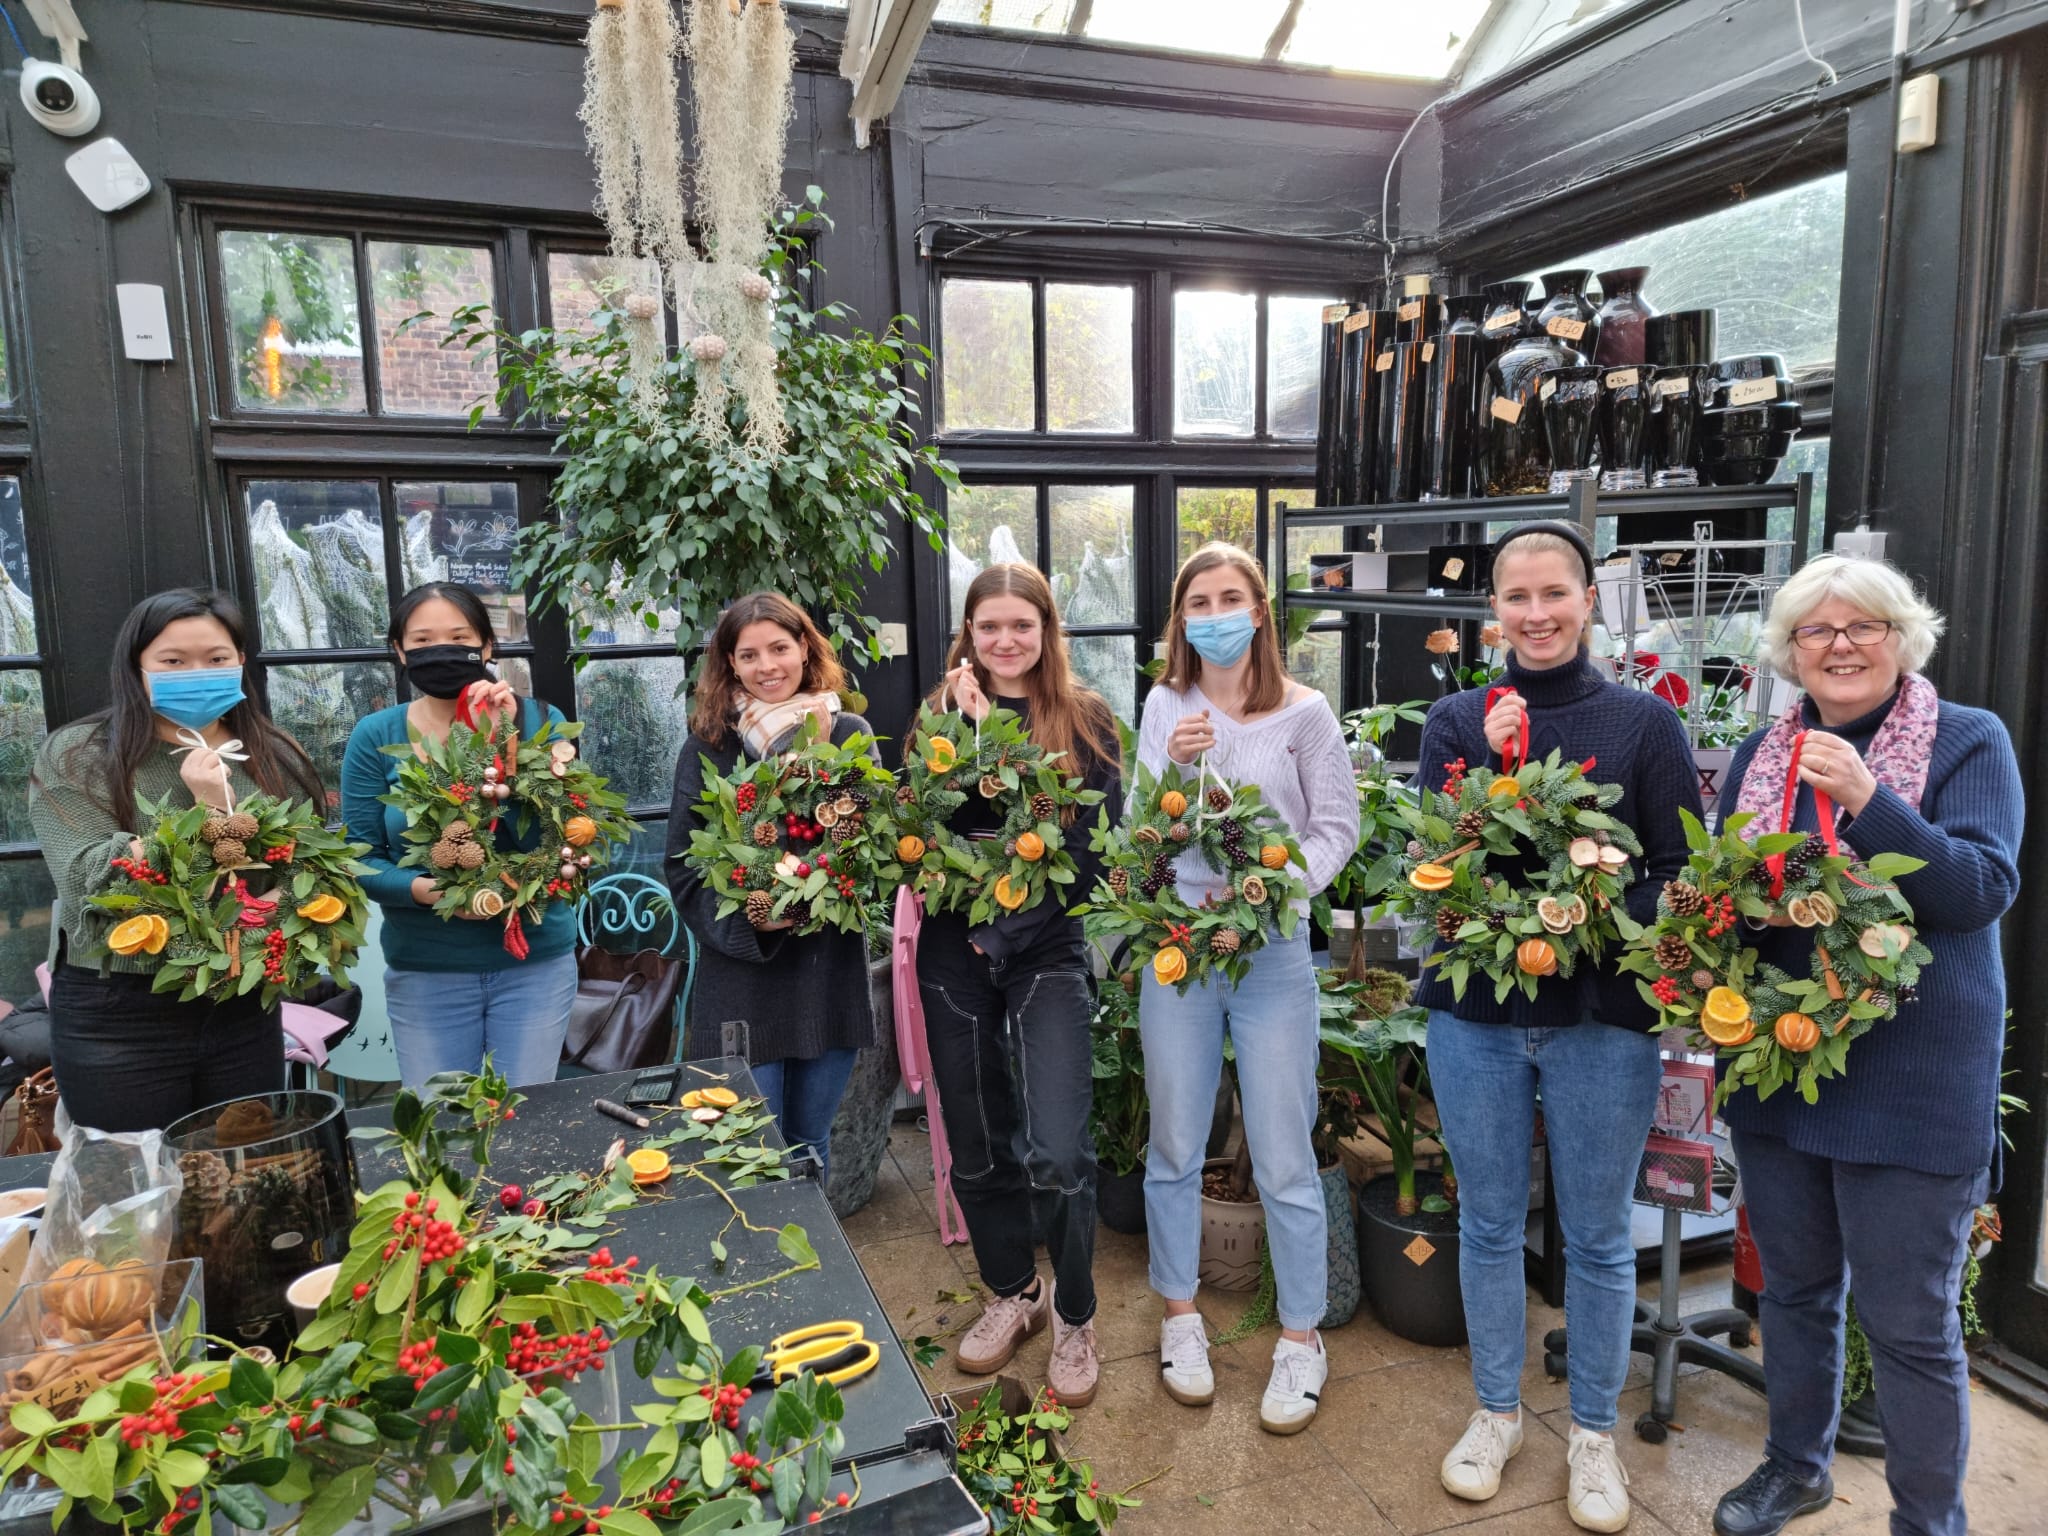 The Flower Station - The Art of Wreath Making